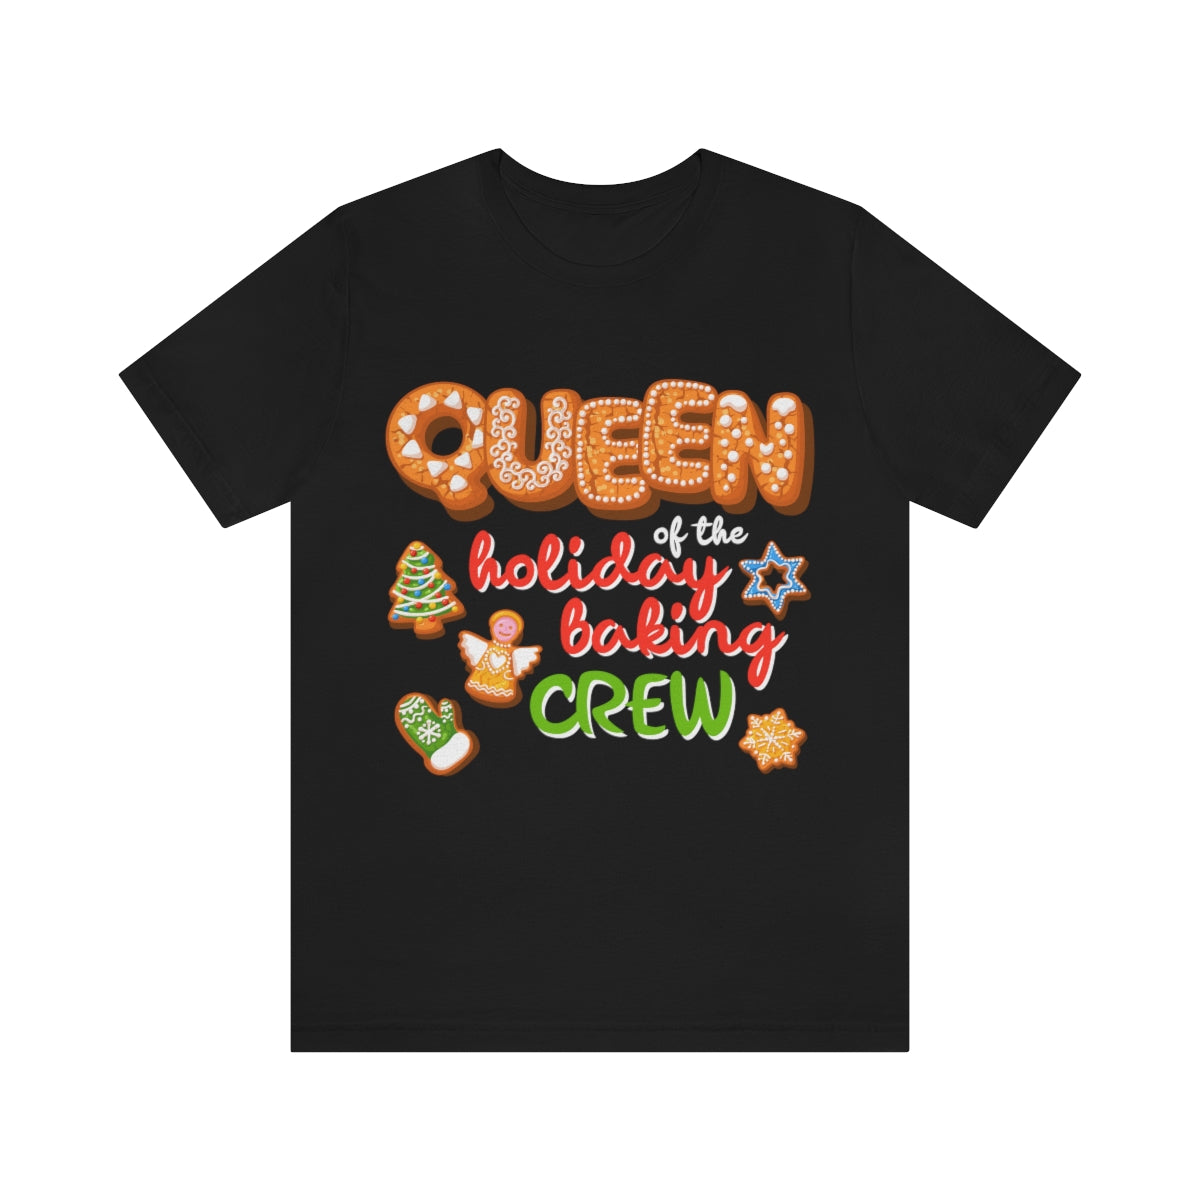 Queen of the holiday baking crew - Family Matching Funny Christmas T-shirts for women or men - 37 Design Unit